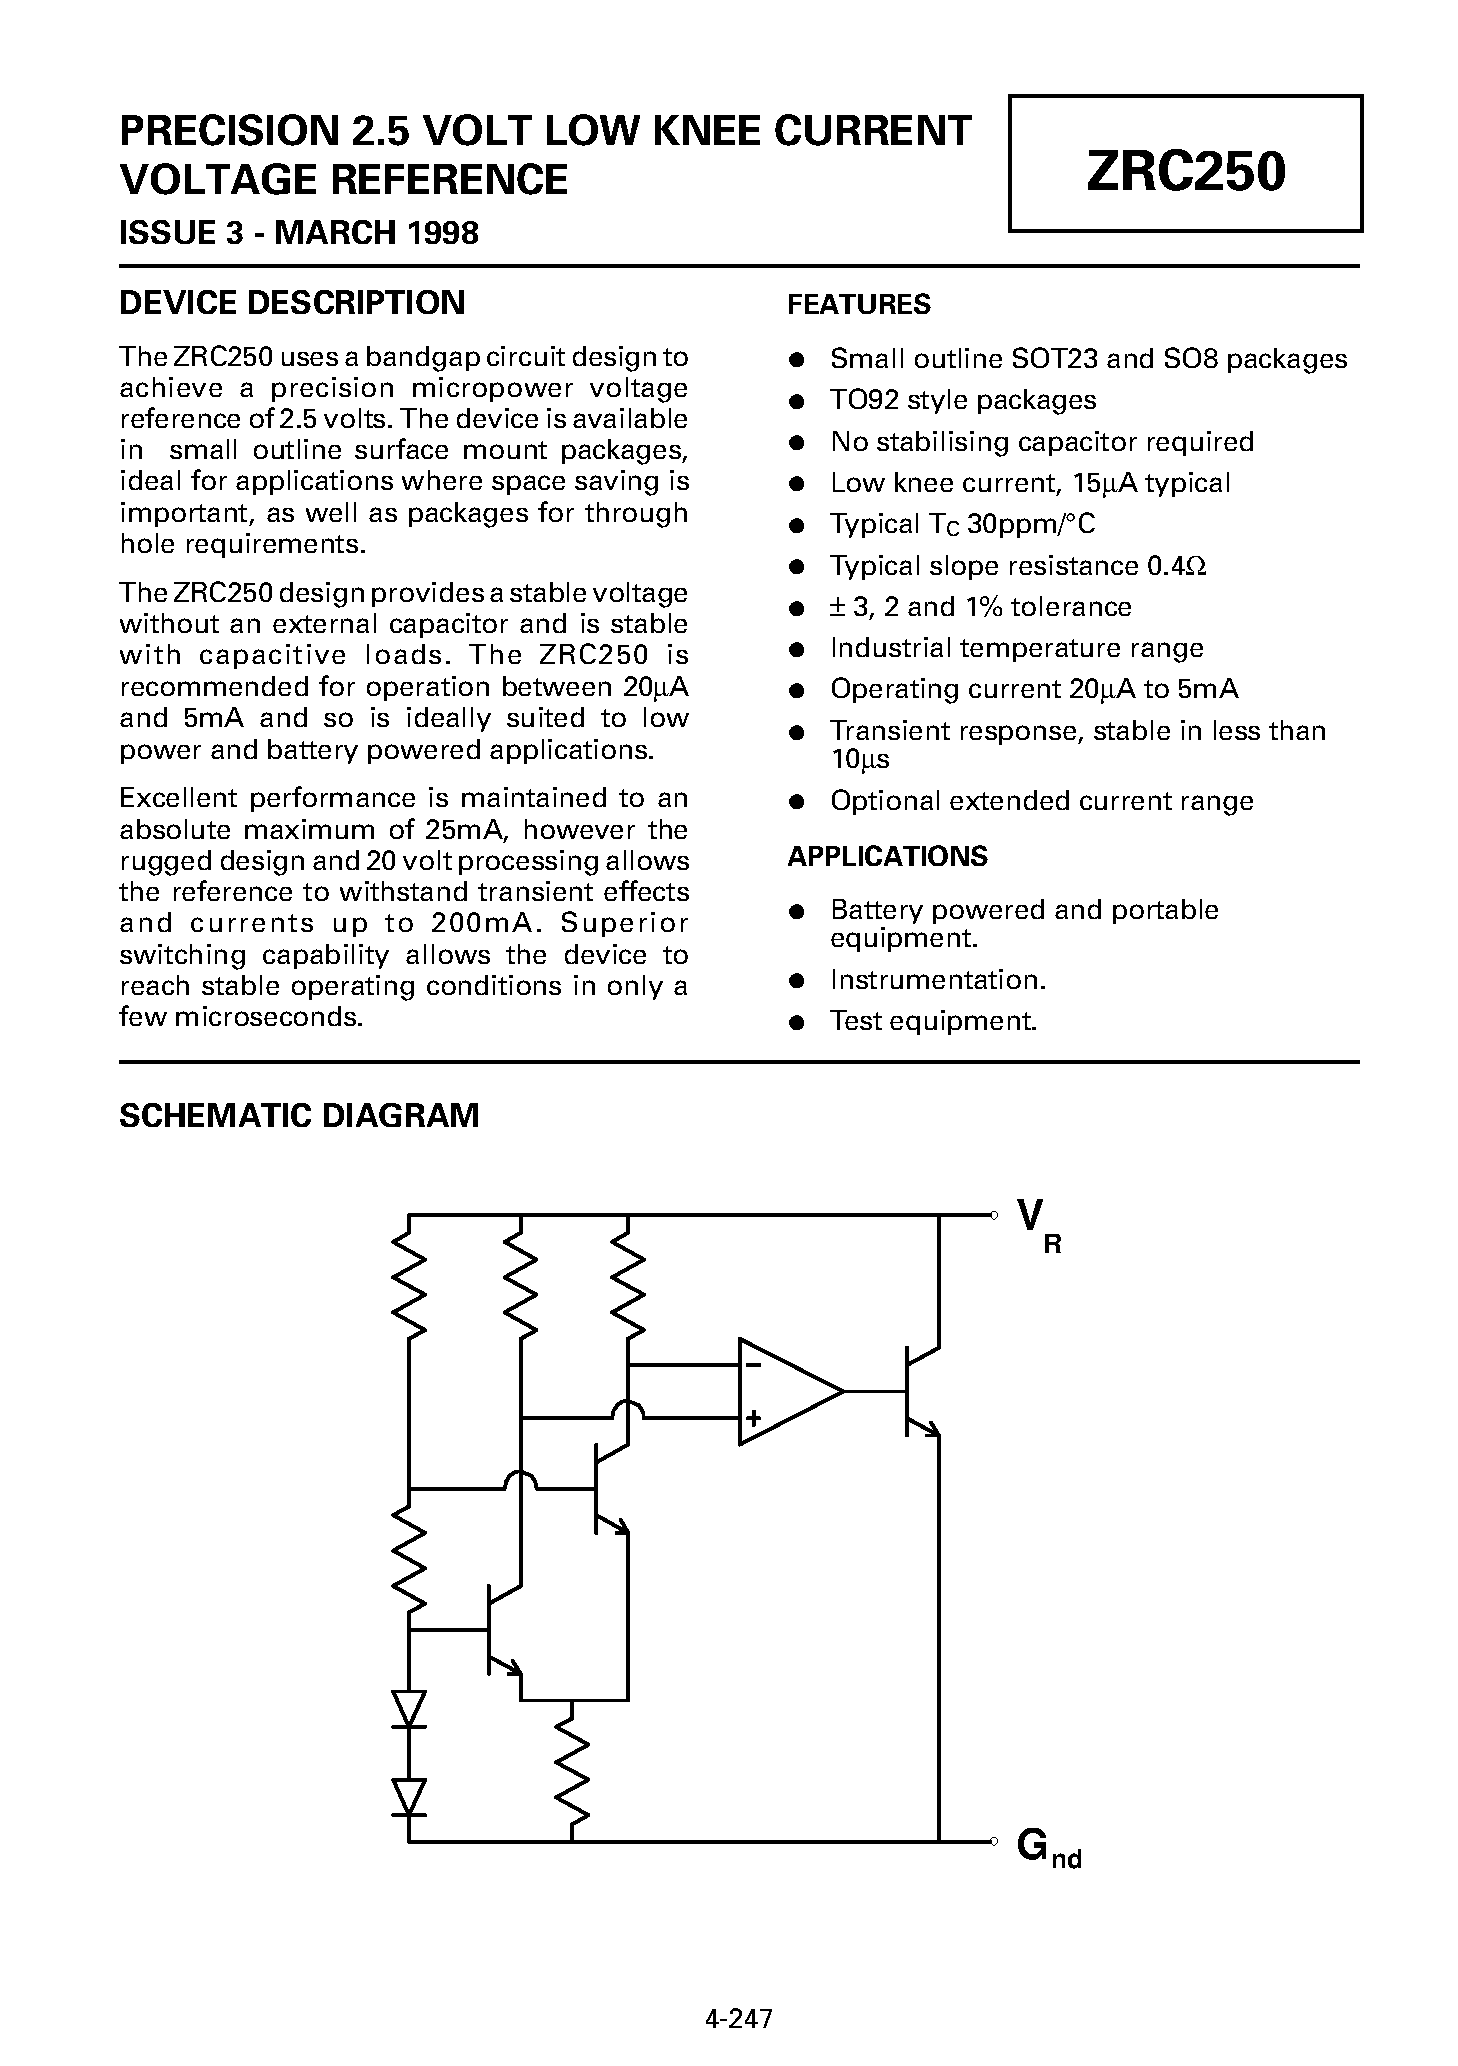 Datasheet ZRC250F02 - PRECISION 2.5 VOLT LOW KNEE CURRENT VOLTAGE REFERENCE page 1